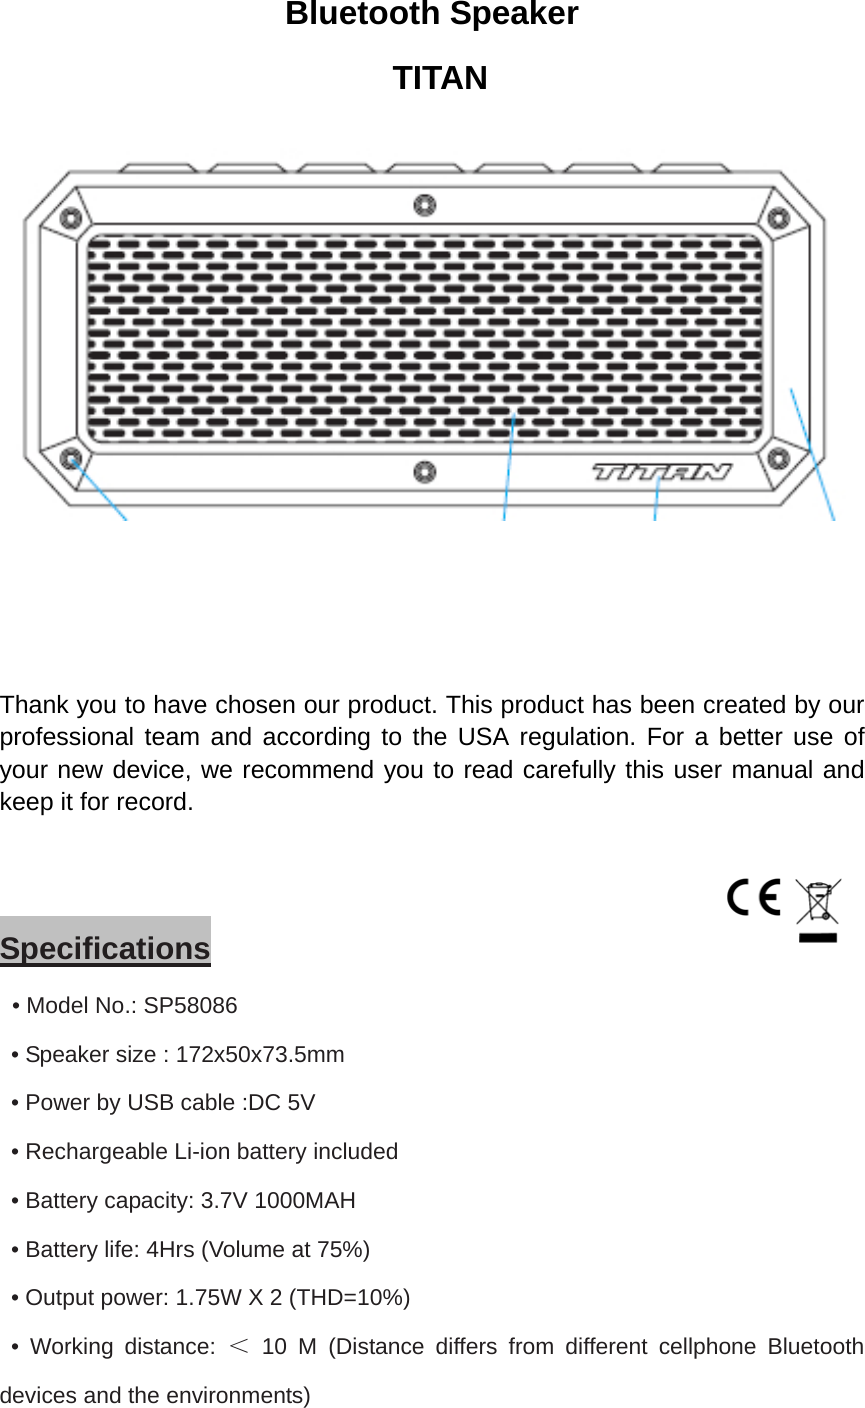 Bluetooth Speaker  TITAN    Thank you to have chosen our product. This product has been created by our professional team and according to the USA regulation. For a better use of your new device, we recommend you to read carefully this user manual and keep it for record.      Specifications  • Model No.: SP58086   • Speaker size : 172x50x73.5mm   • Power by USB cable :DC 5V   • Rechargeable Li-ion battery included   • Battery capacity: 3.7V 1000MAH   • Battery life: 4Hrs (Volume at 75%)   • Output power: 1.75W X 2 (THD=10%)  • Working distance: ＜ 10 M (Distance differs from different cellphone Bluetooth devices and the environments) 